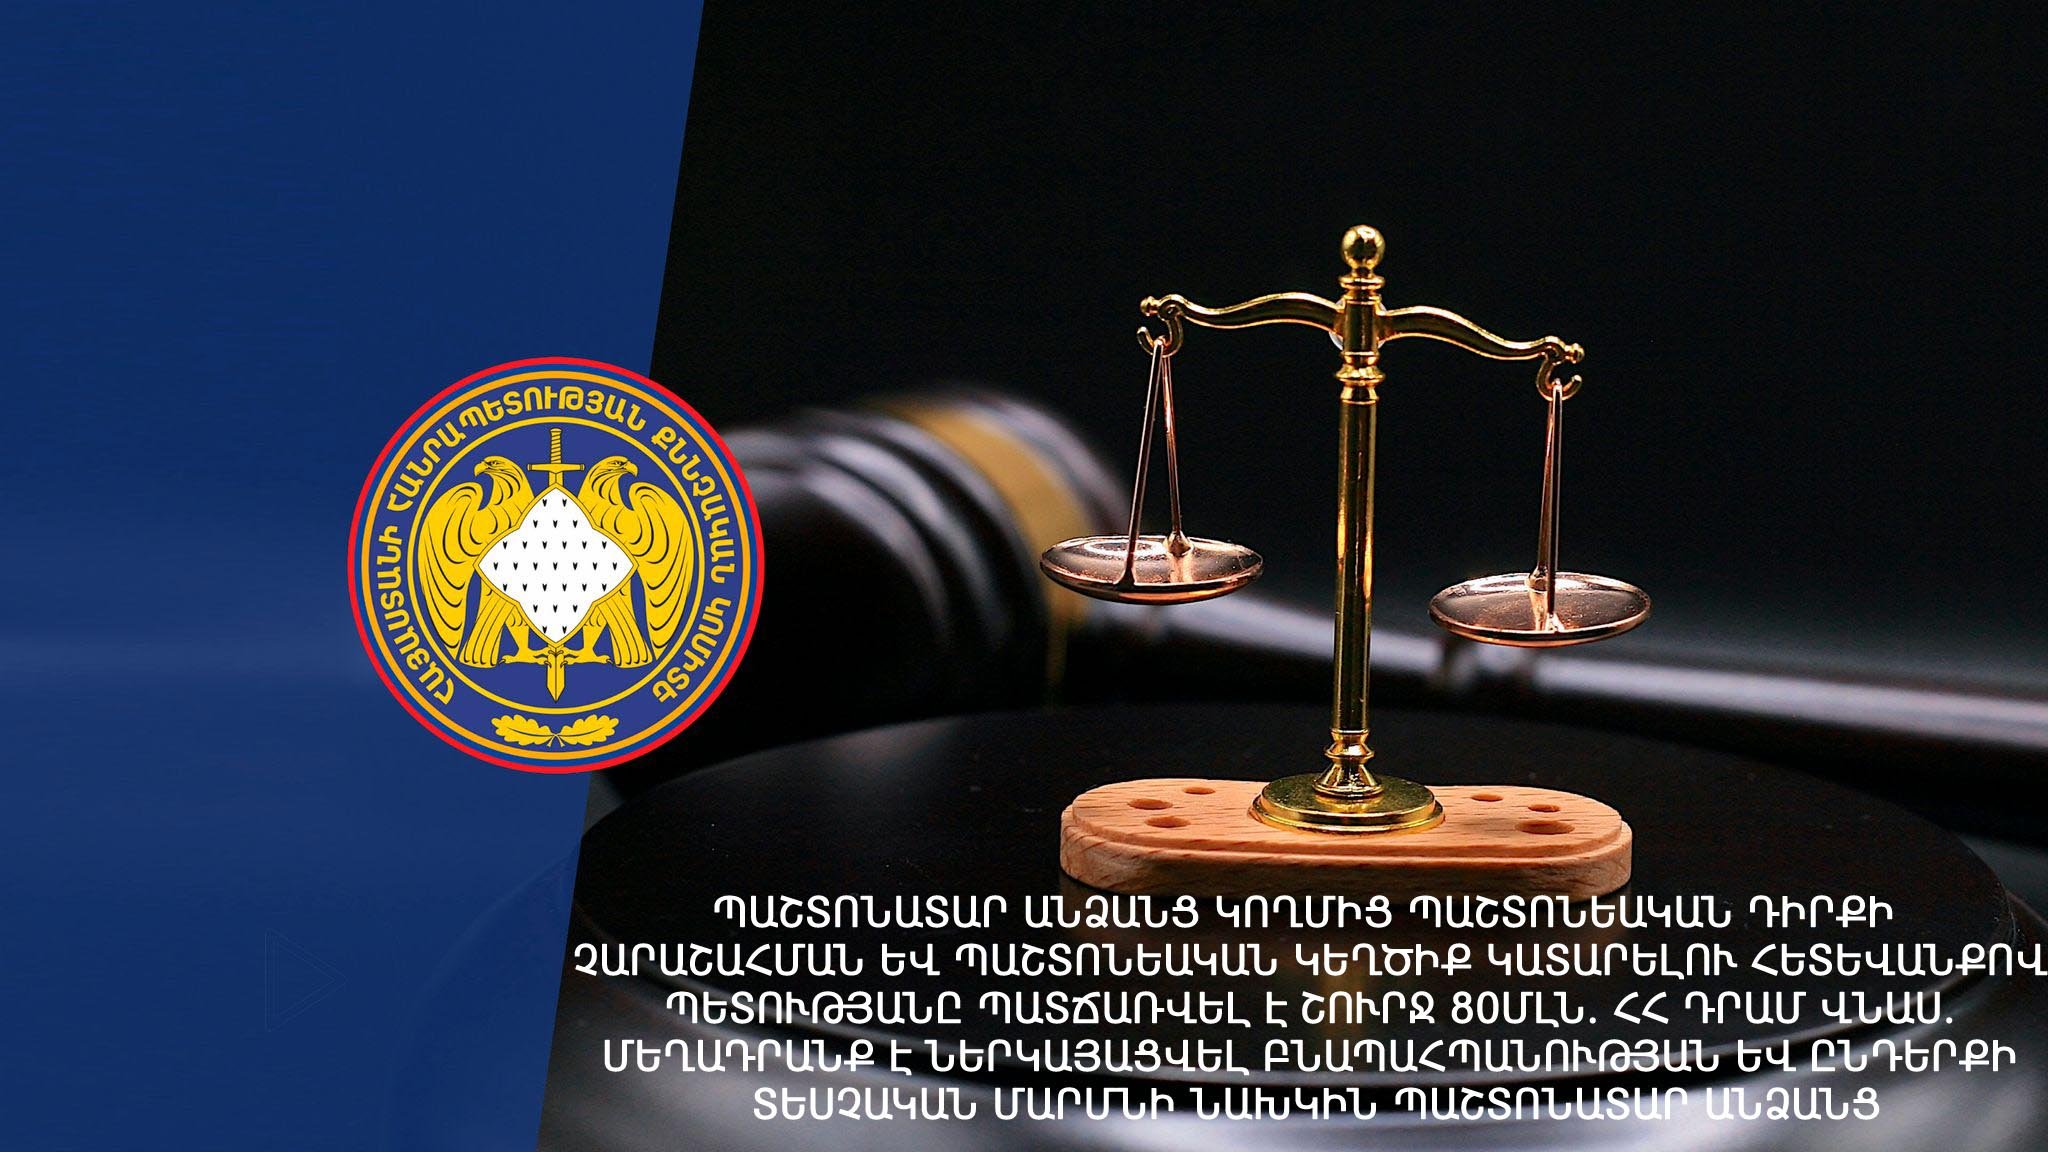 As a Result of Abuse of Official Position and Official Forgery Committed by Officials Pecuniary Damage of about 80 Mln AMD Caused to State; Charge Pressed against Previous Officials of the Environmental Protection and Mining Inspection Body